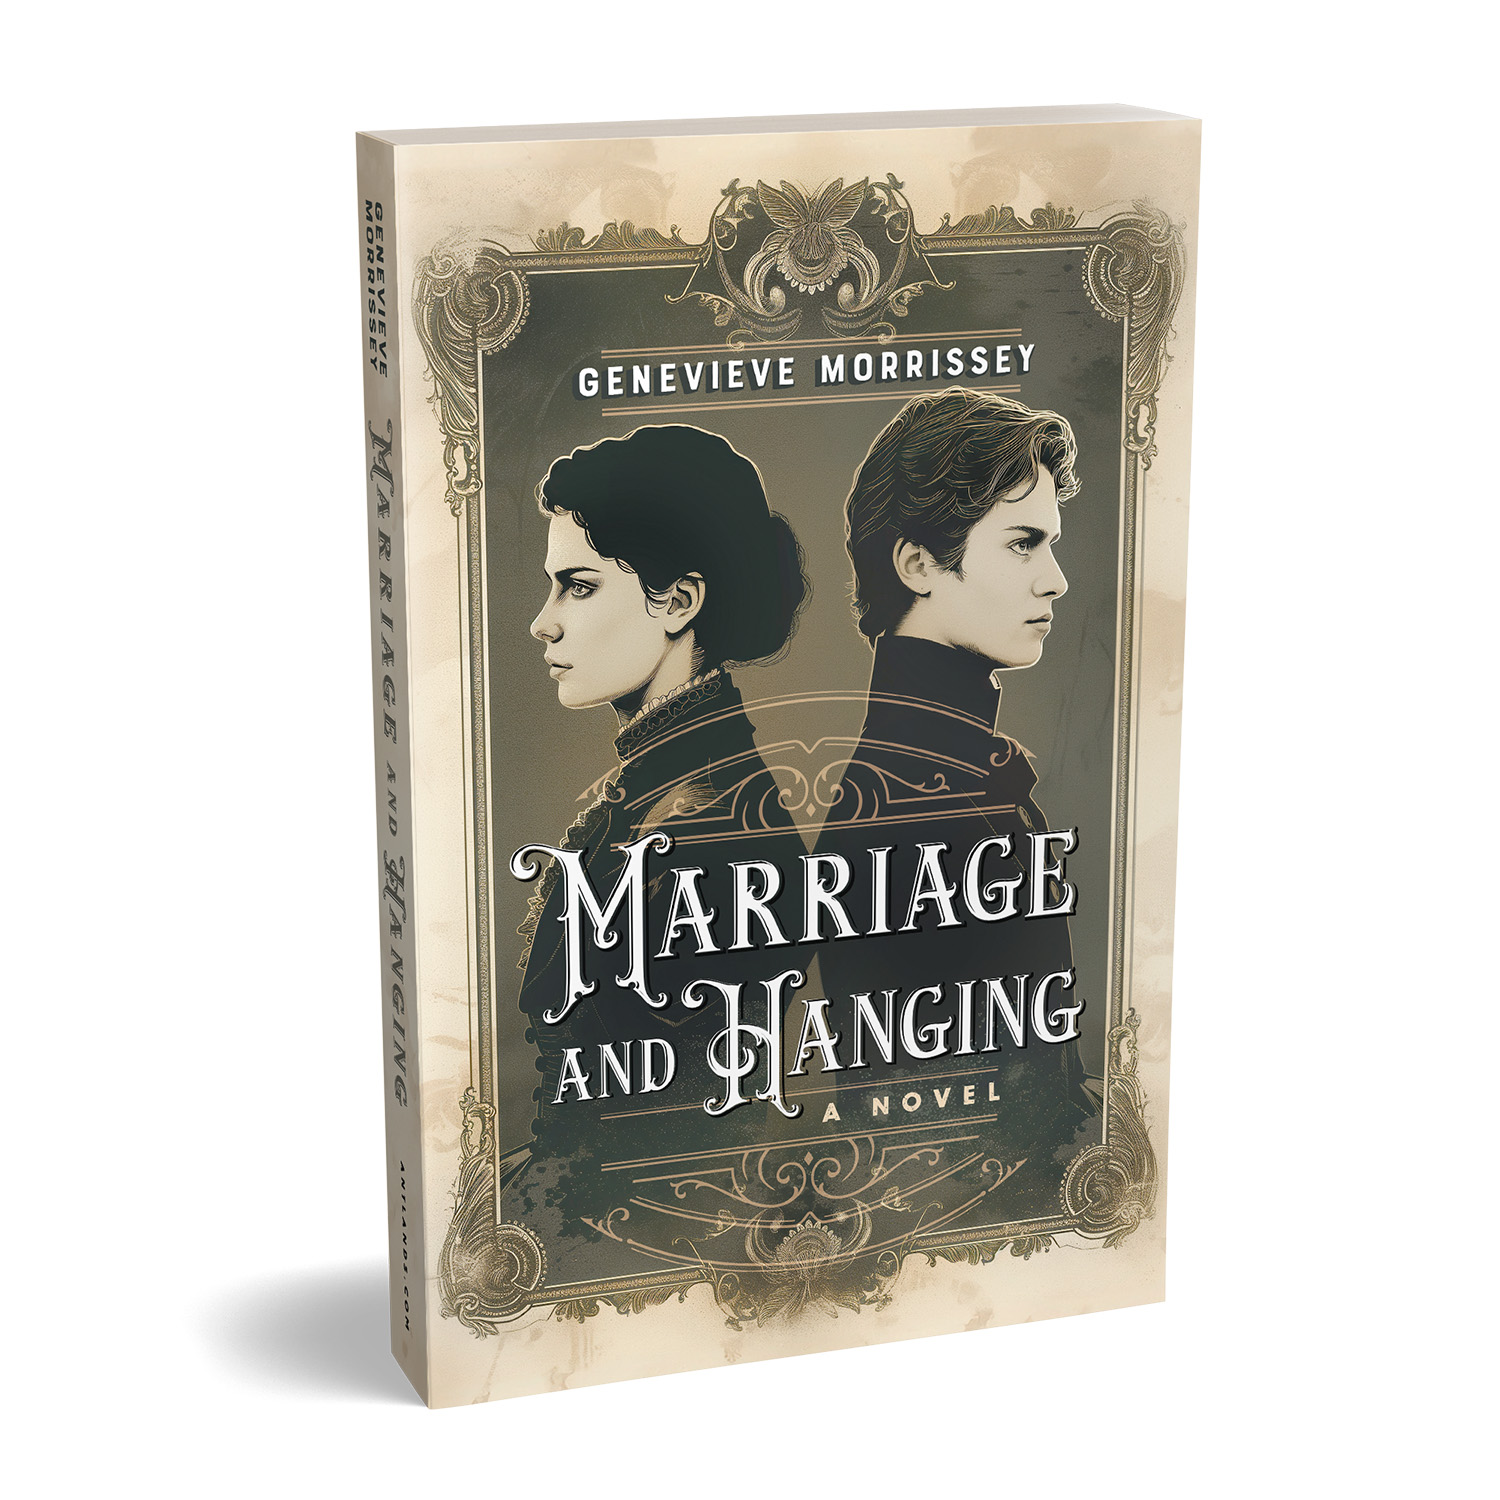 'Marriage and Hanging' is an intriguing murder mystery novel set in early 19th century America. The author is Genevieve Morrissey. The cover design and interior formatting are by Mark Thomas of coverness.com. To find out more about my book design services, please visit www.coverness.com.